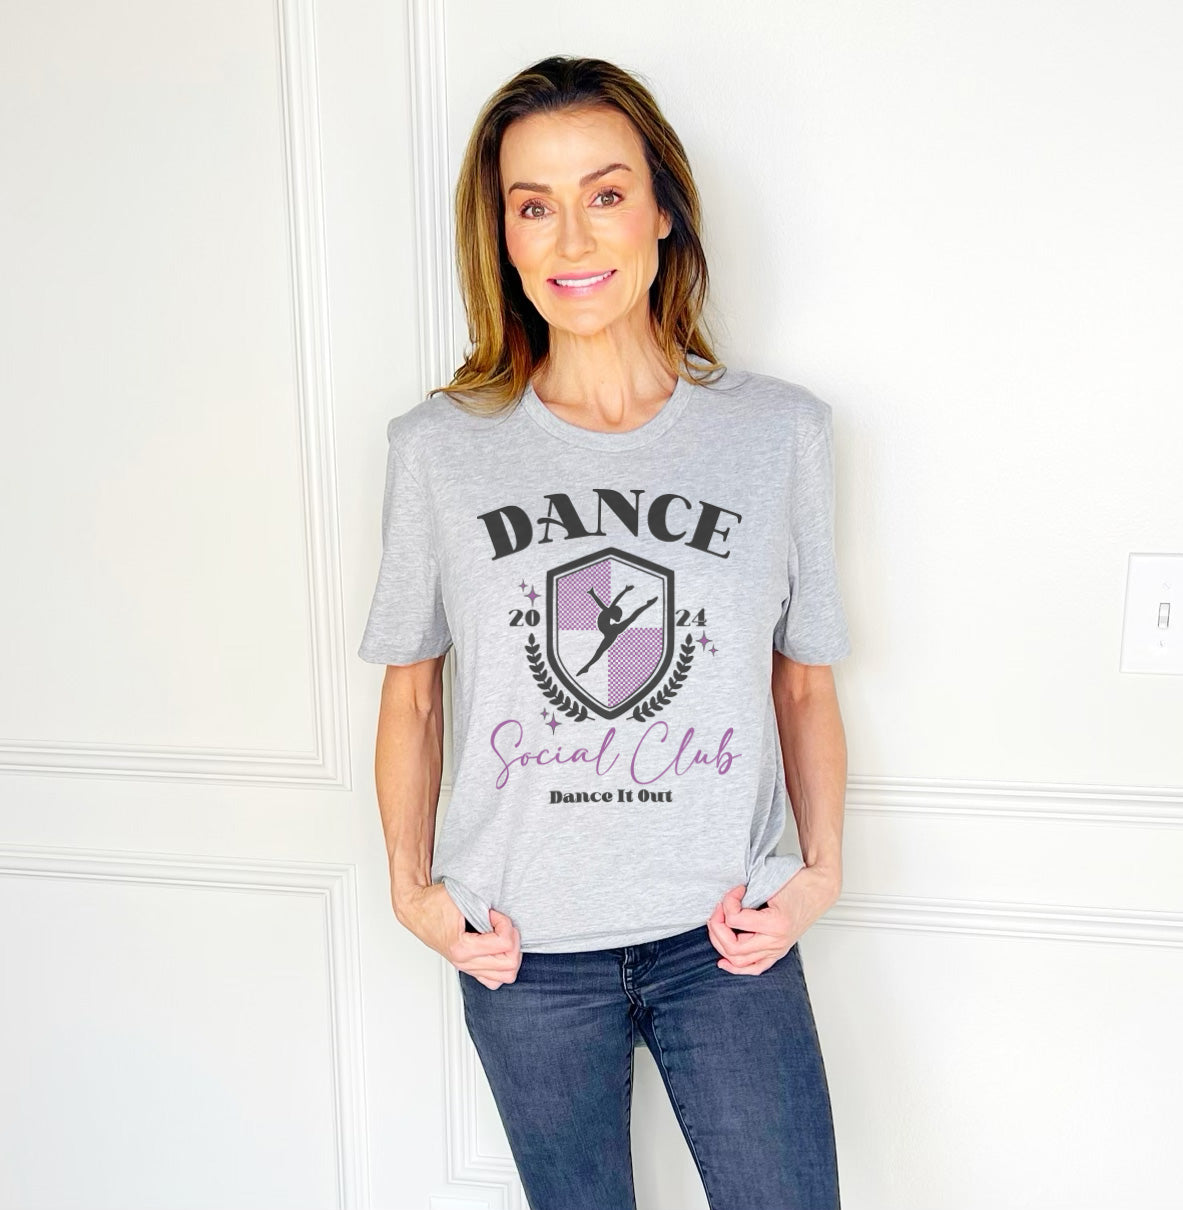 Dance Social Club Youth and Adult Tee